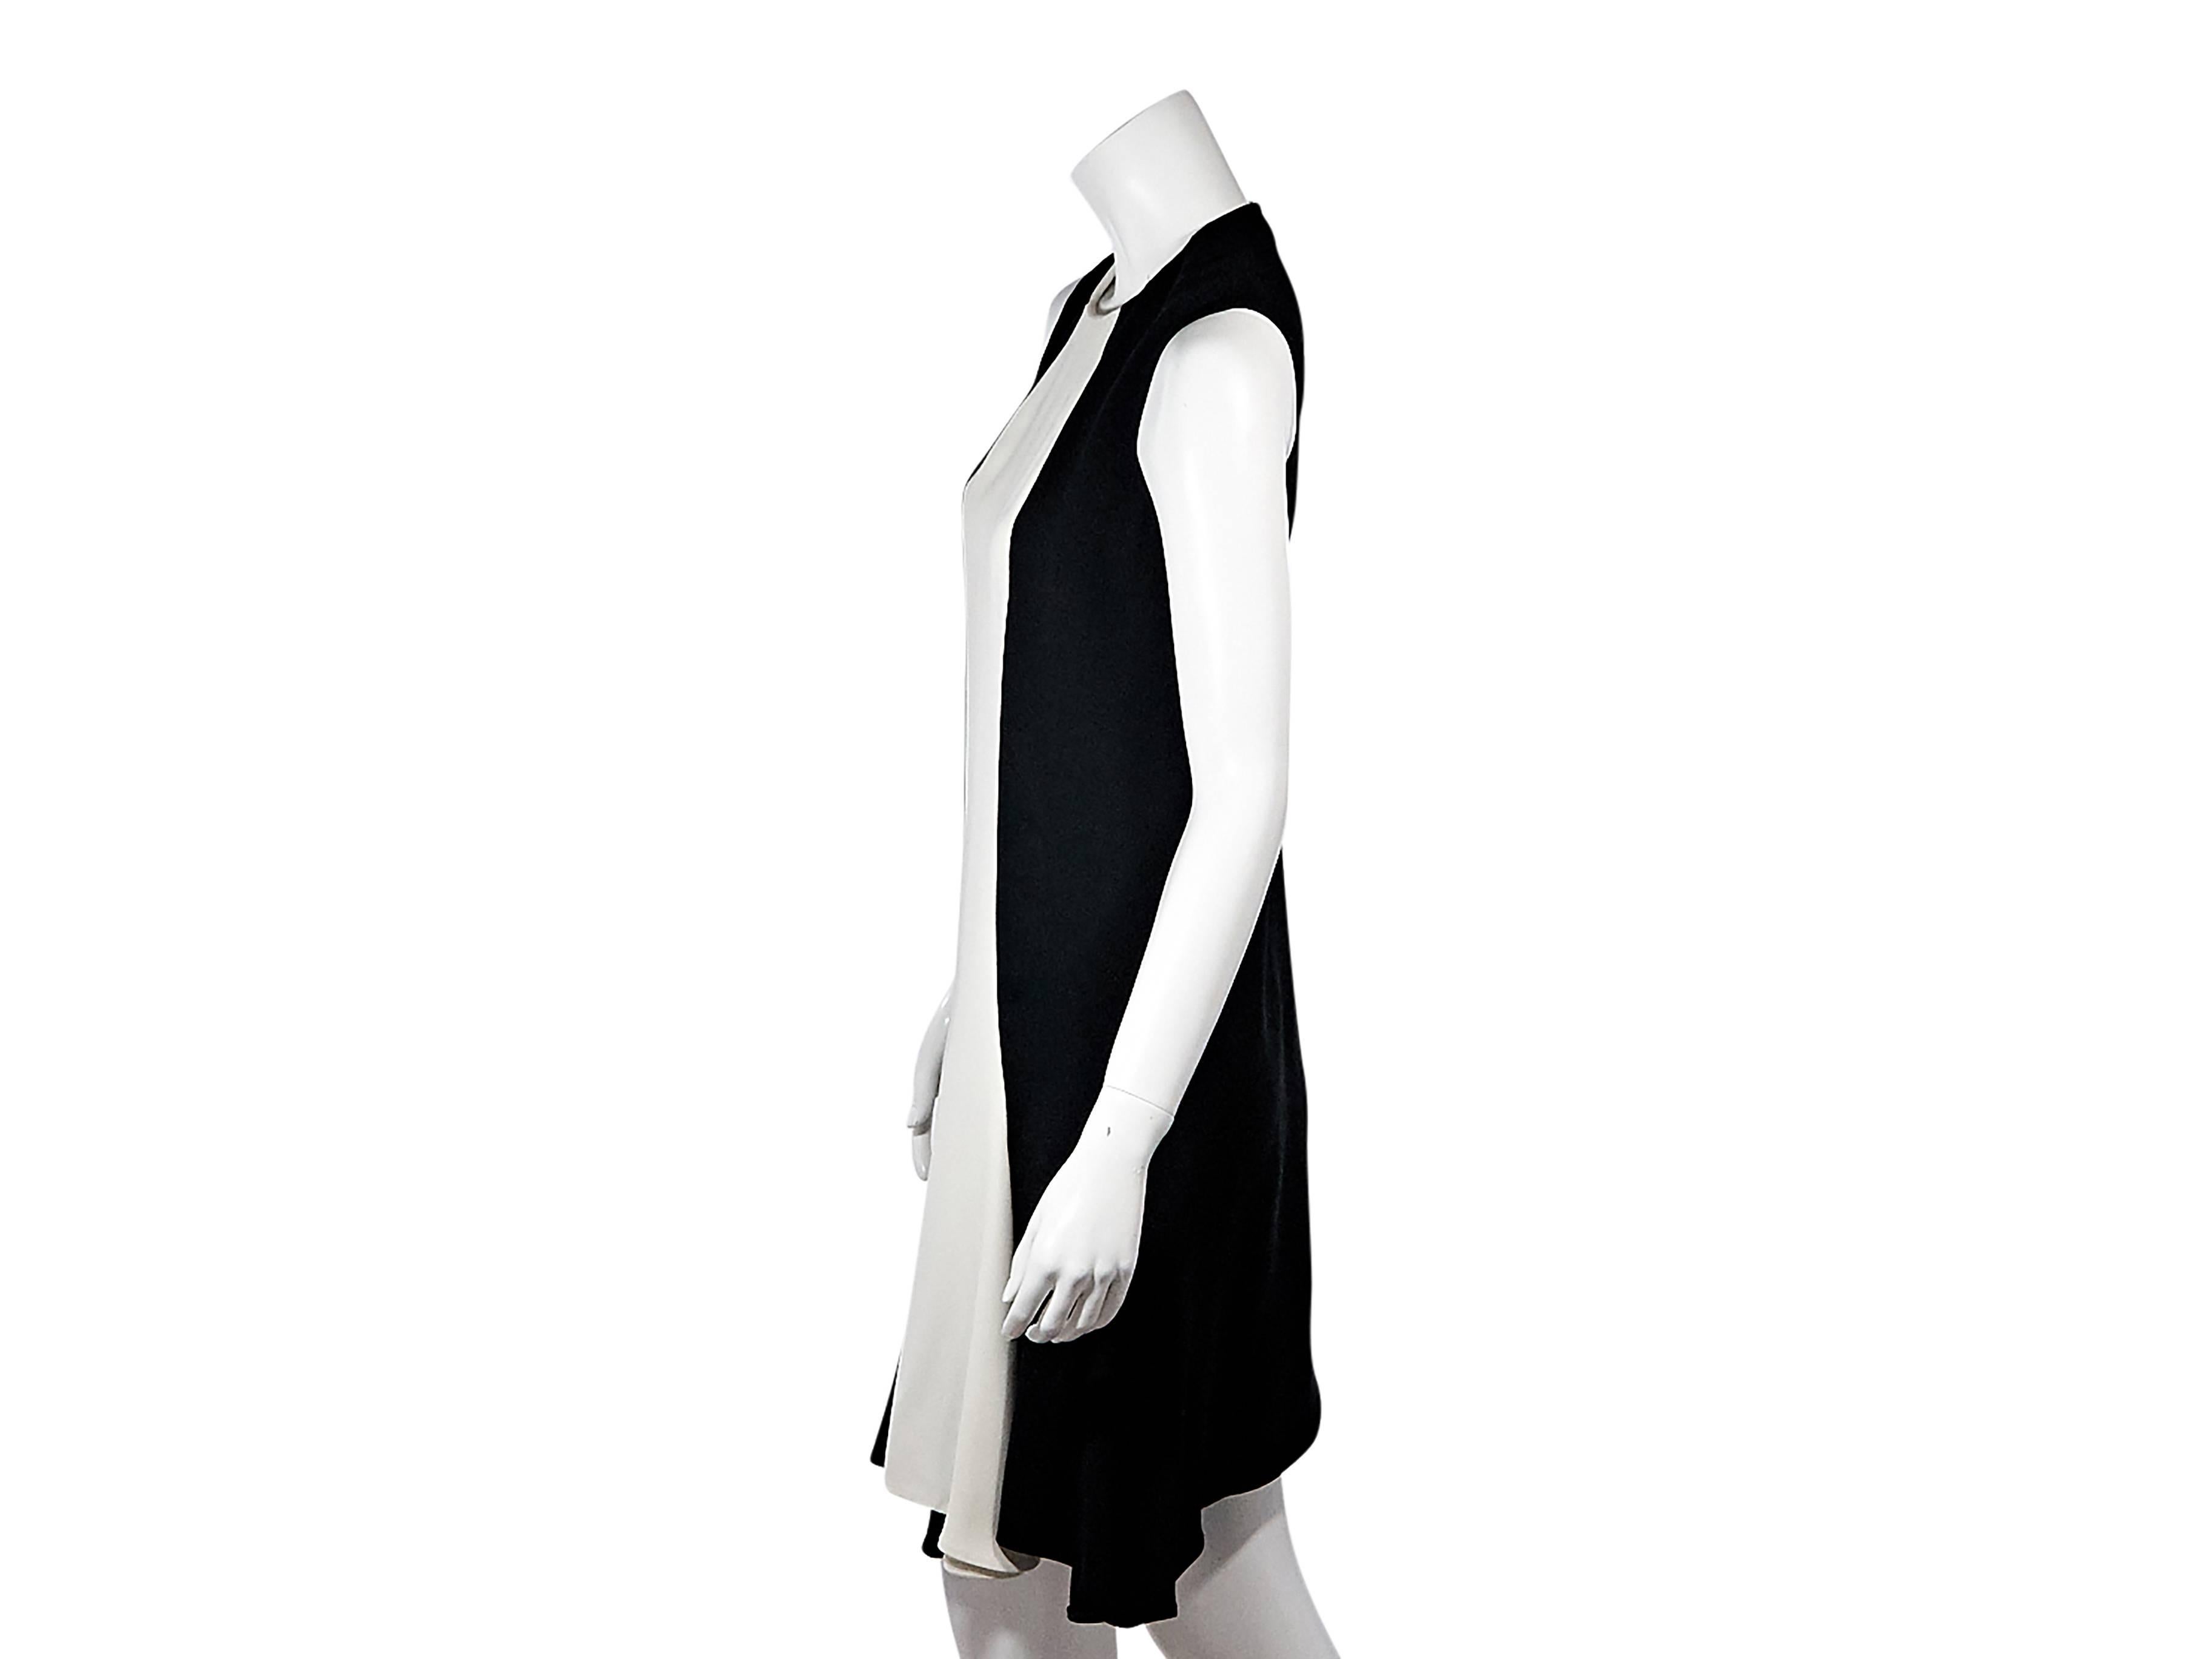 Product details: Black and white shift dress by Stella McCartney. Crewneck. Sleeveless. Concealed back zip closure. Label size FR 38. 
Condition: Pre-owned. Very good.

Est. Retail $ 1,198.00